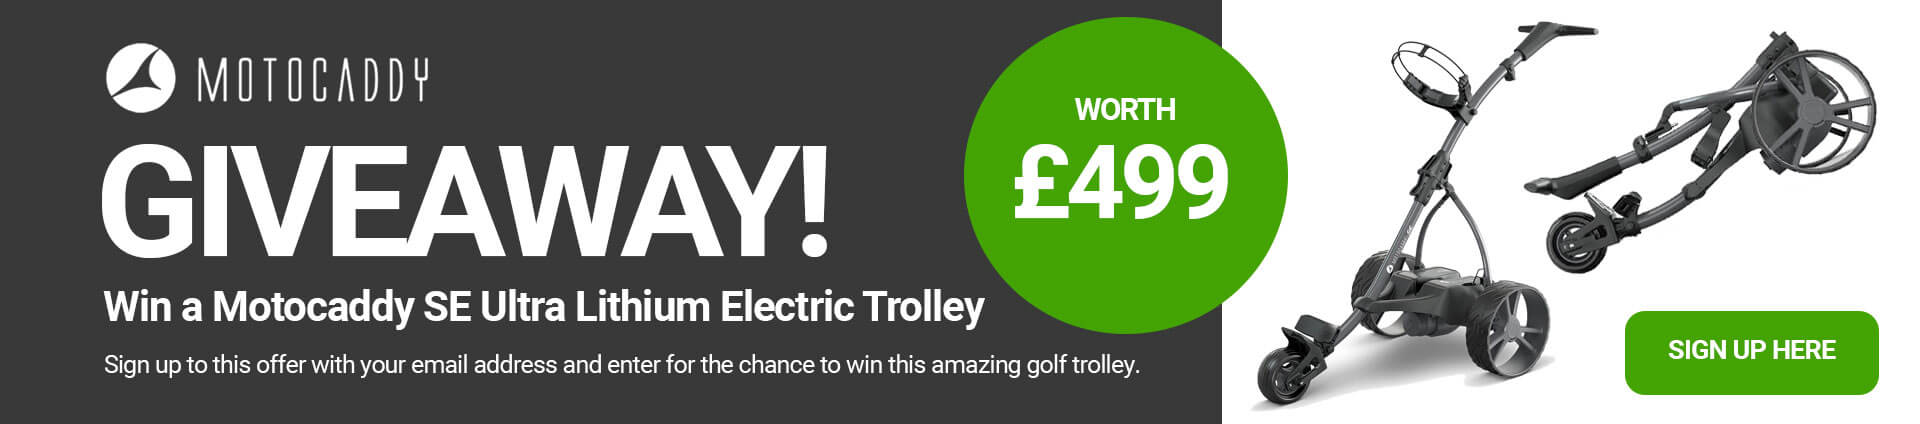 Motocaddy SE Trolley Giveaway Banner